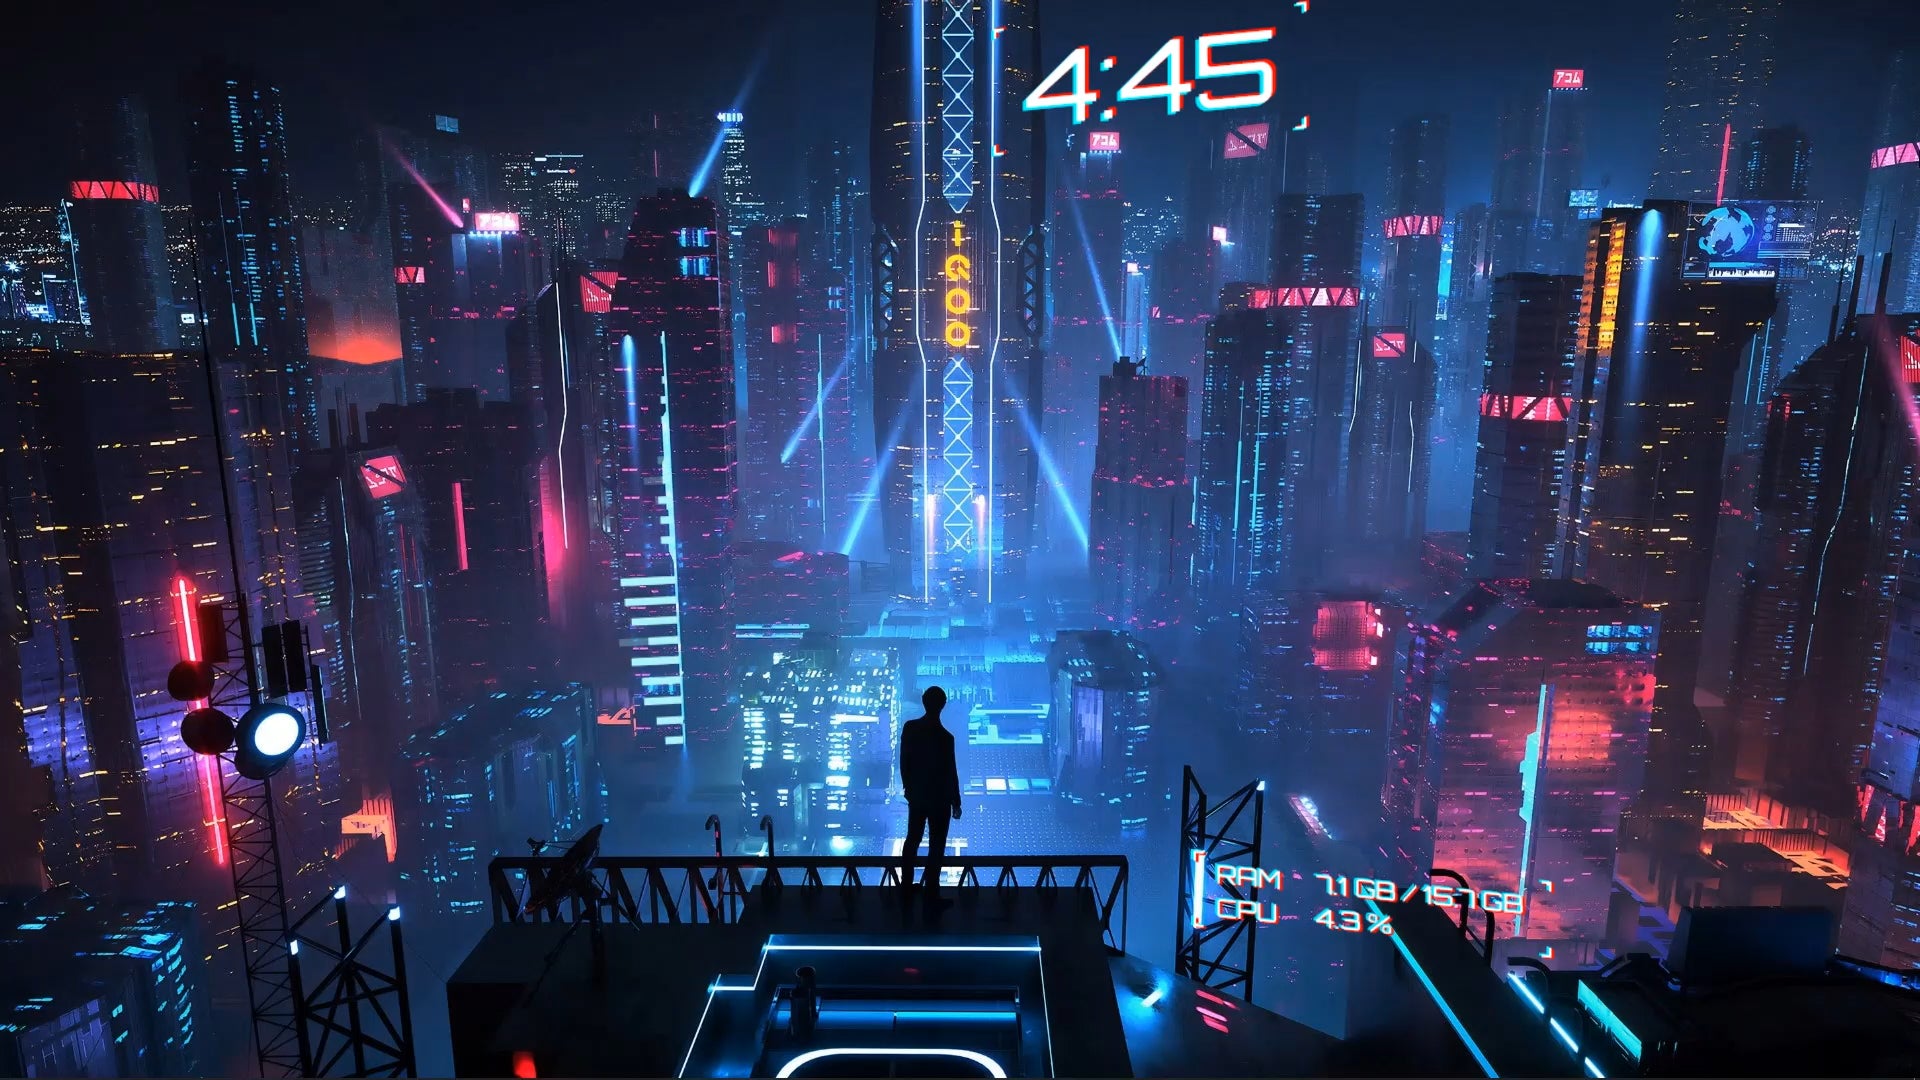 cyberpunk synthwave Wallpapers